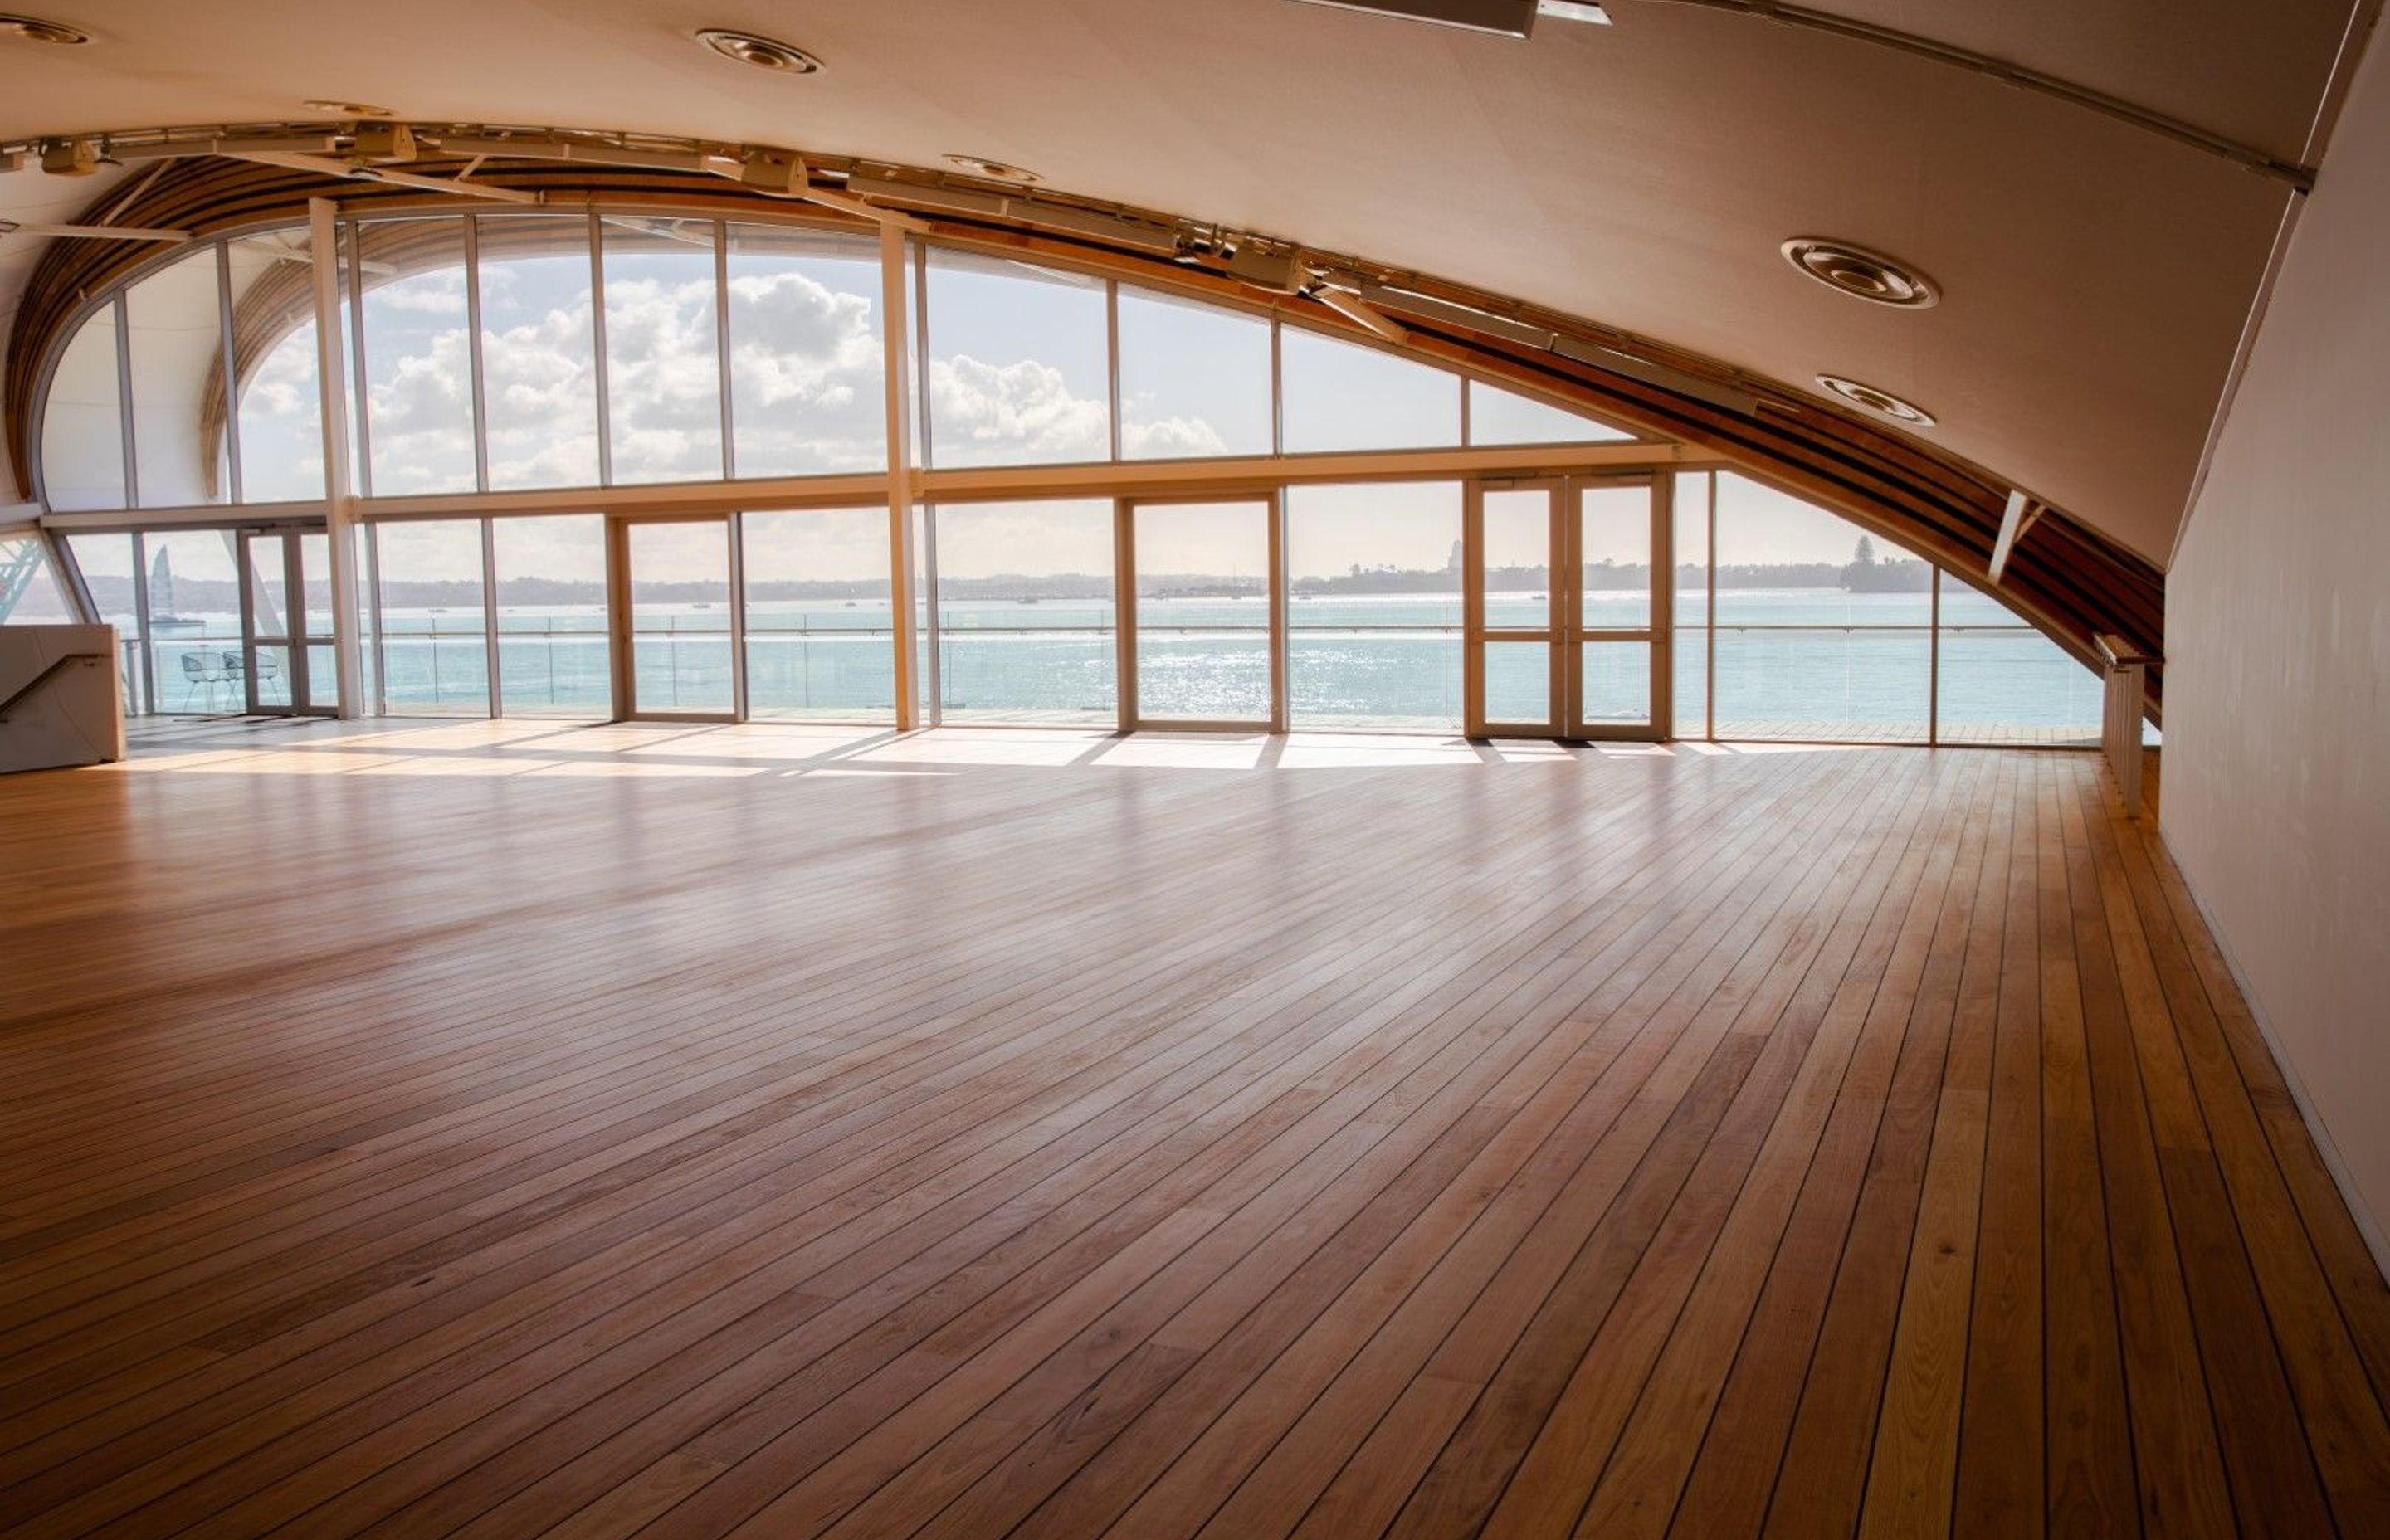 HURFORD'S Silvertop Custom Boat Deck Profile for THE CLOUD, Auckland's Waterfront  